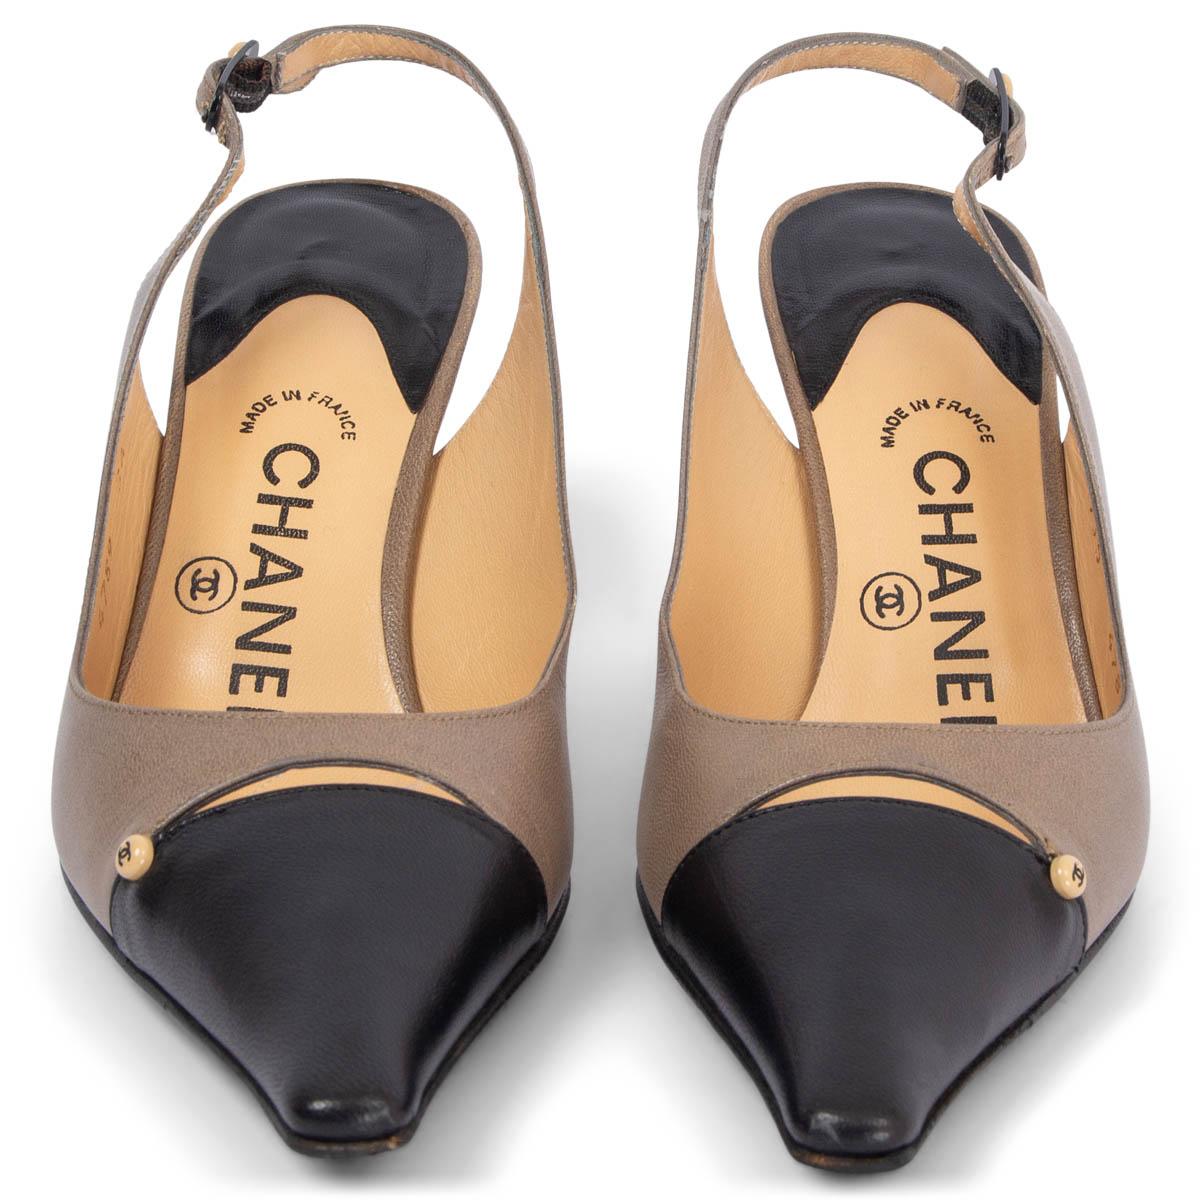 100% authentic Chanel pointed-toe slingbacks in taupe and black calfskin with CC button embellishment. Have been worn and are in excellent condition. 

Measurements
Imprinted Size	36
Shoe Size	36
Inside Sole	23.5cm (9.2in)
Width	7cm (2.7in)
Heel	7cm